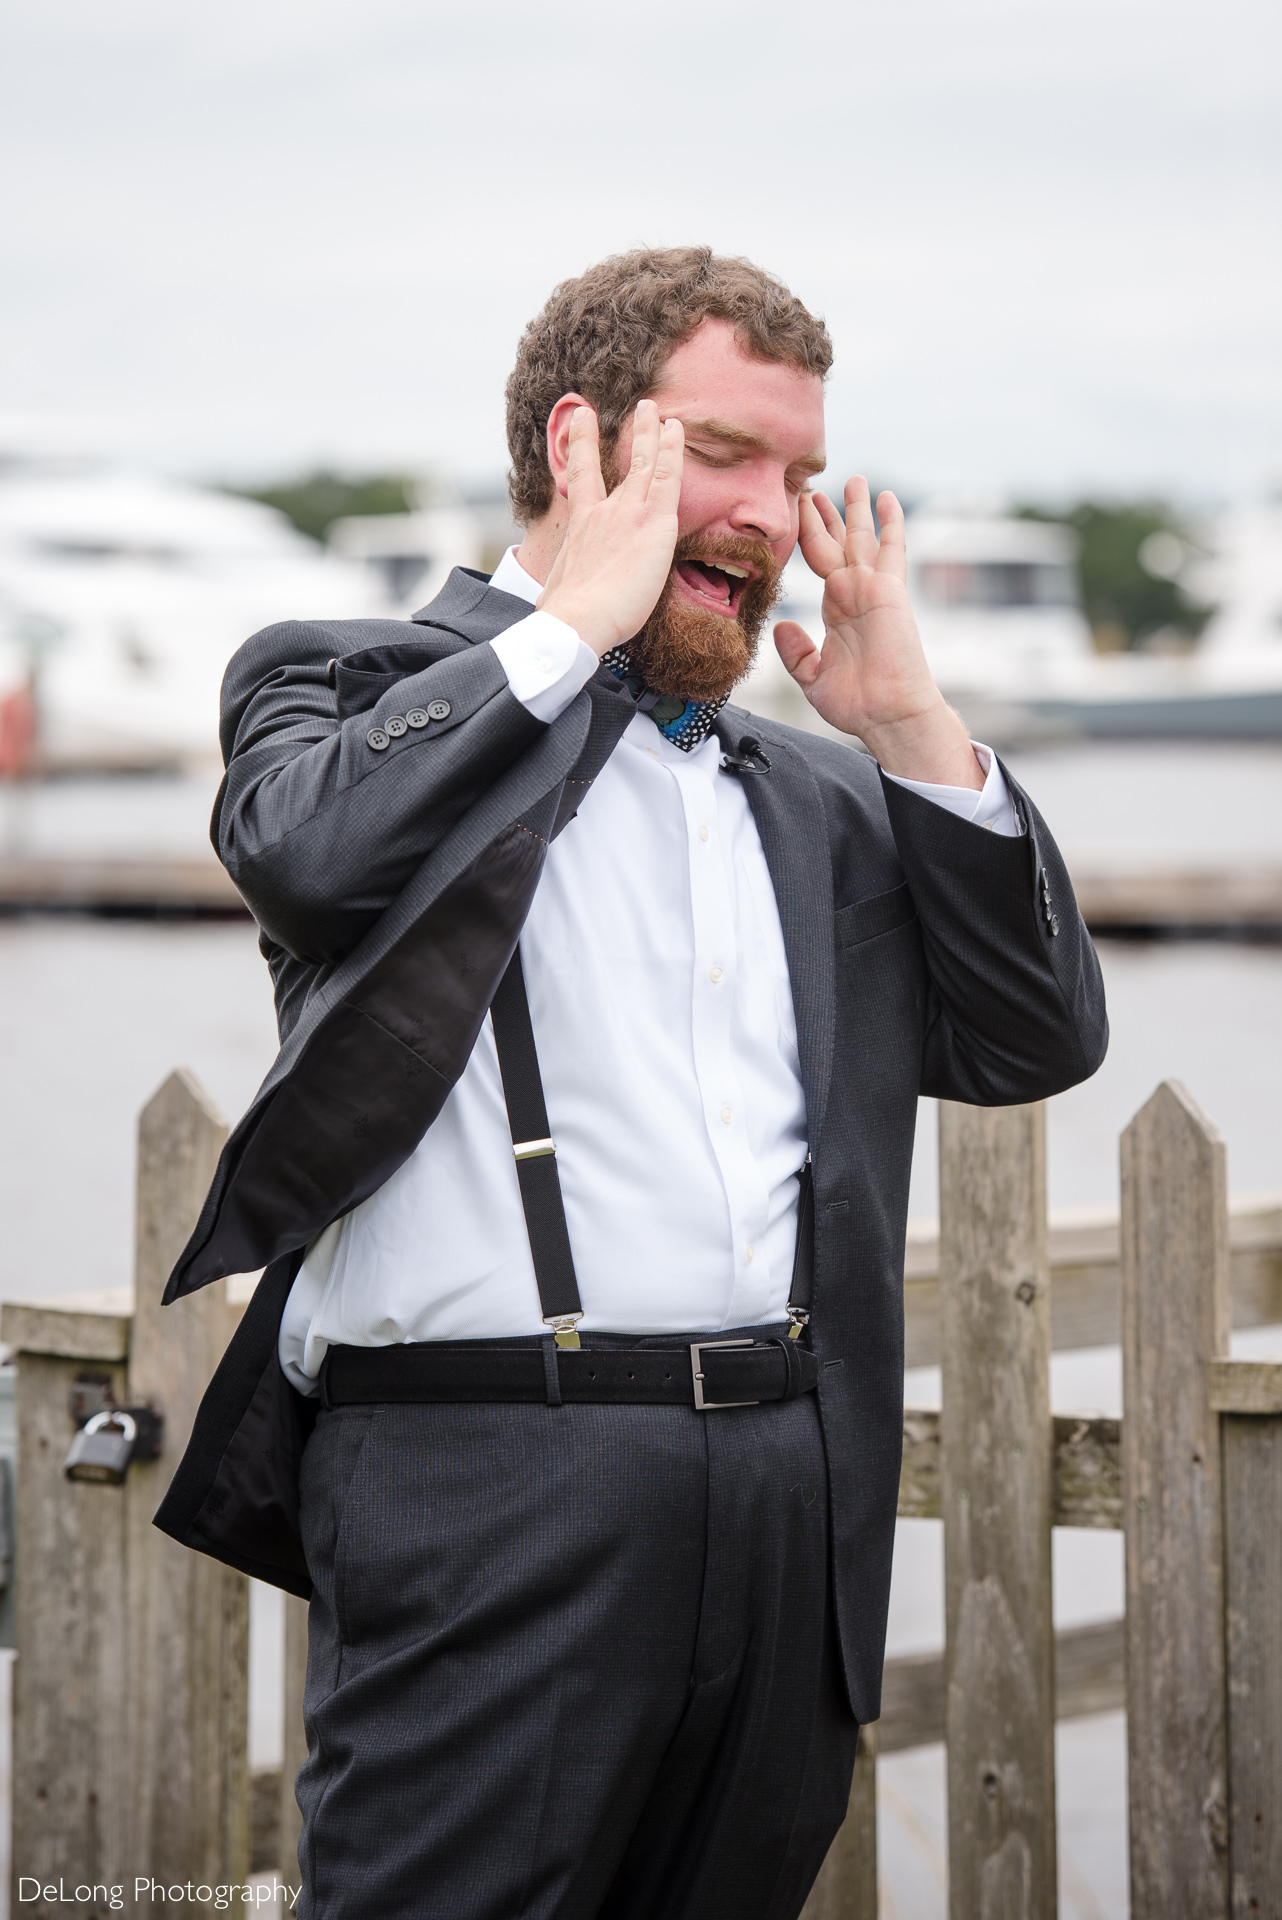 Groom rubbing his eyes reacting to groomsman wearing a dress as a prank during a first look at the Island House by Charlotte Wedding Photographers DeLong Photography